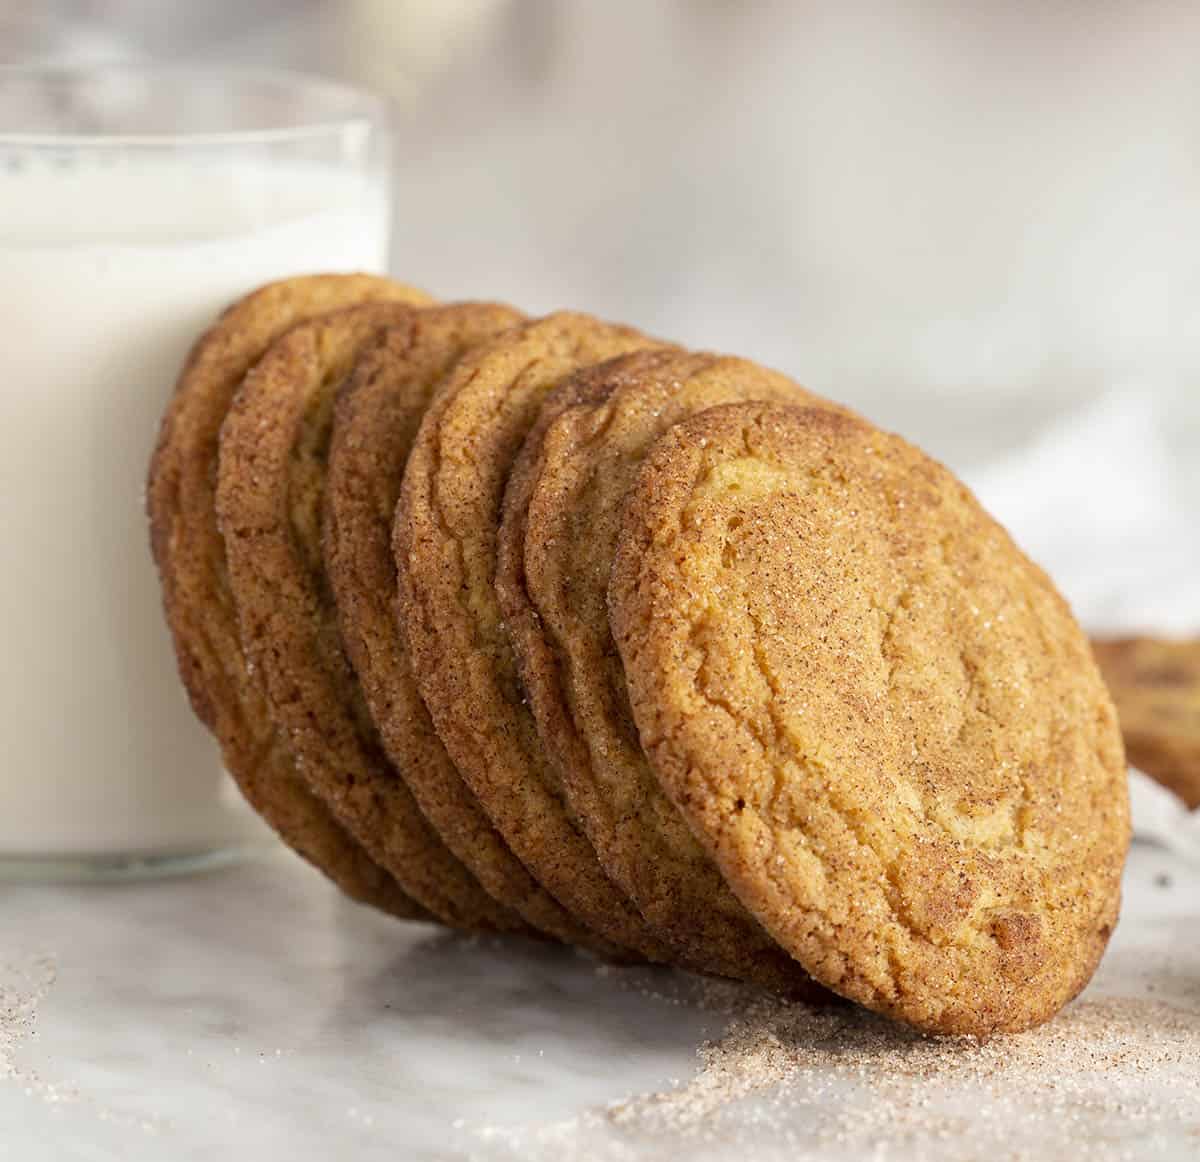 Snickerdoodle cookies next to a glass of milk.